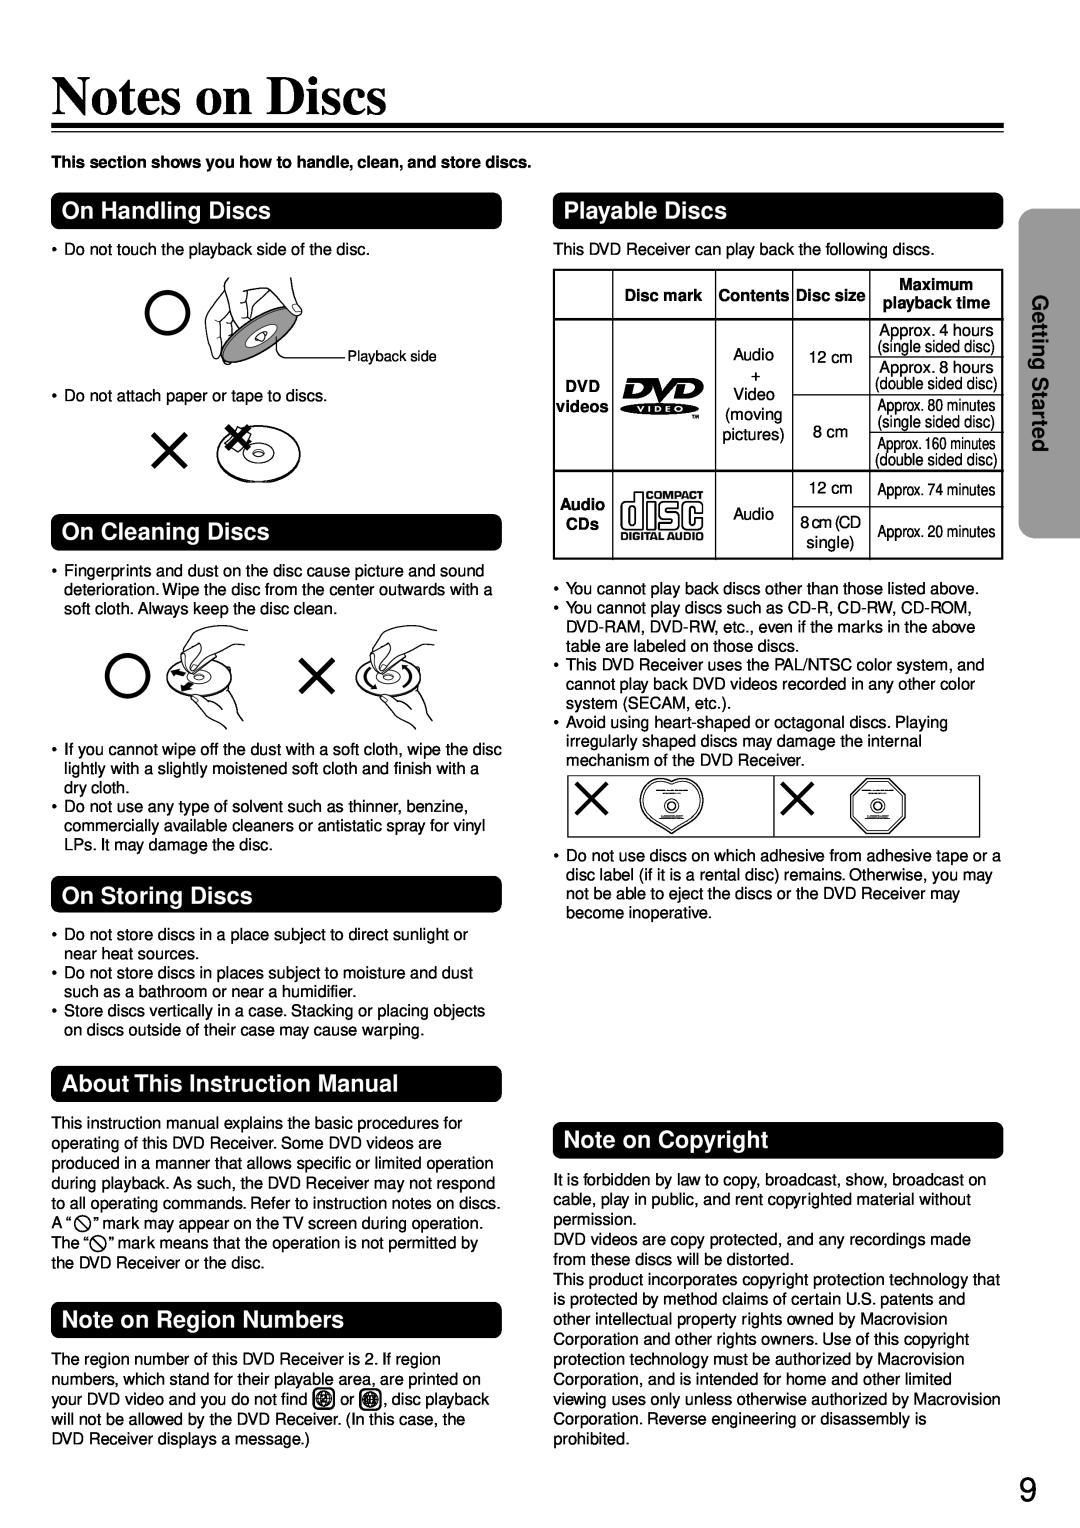 Onkyo DR-90 Notes on Discs, On Handling Discs, On Cleaning Discs, Playable Discs, On Storing Discs, Note on Region Numbers 